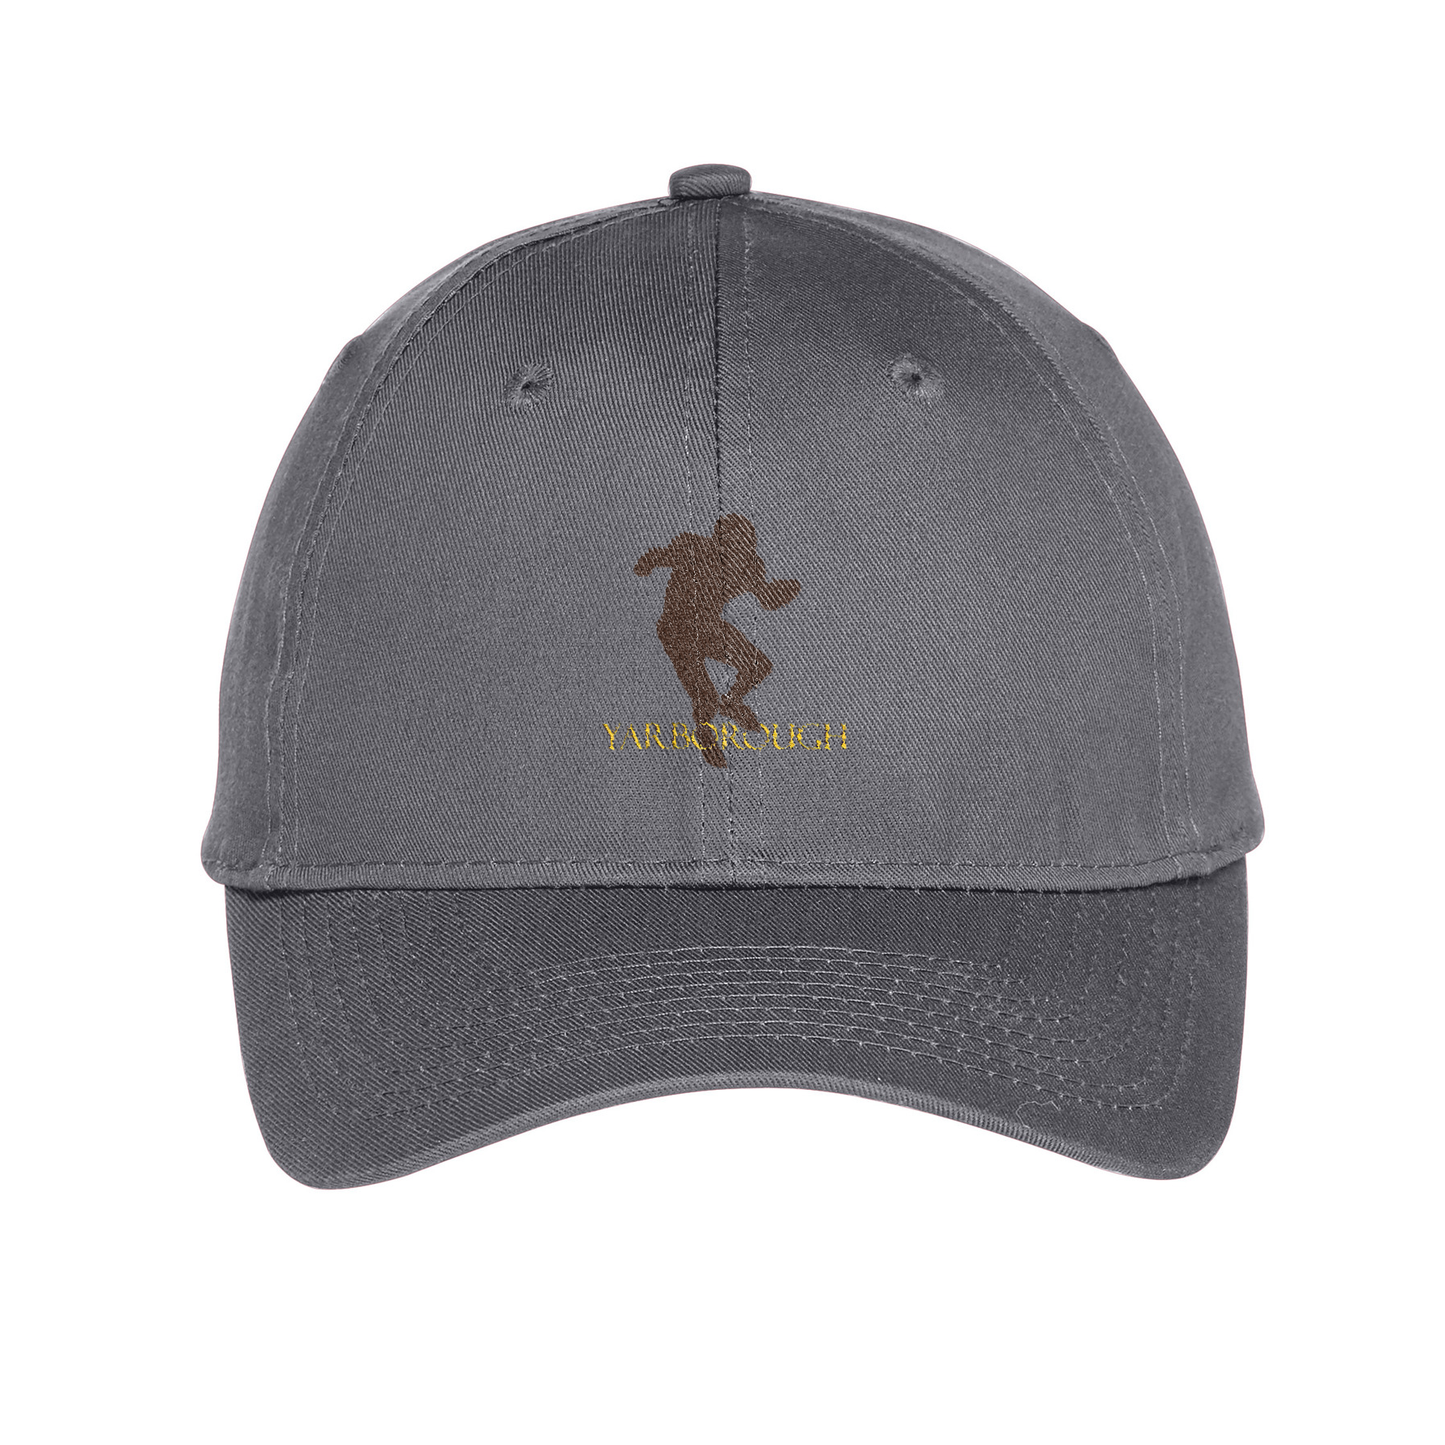 GT Yarborough Embroidered Twill Cap